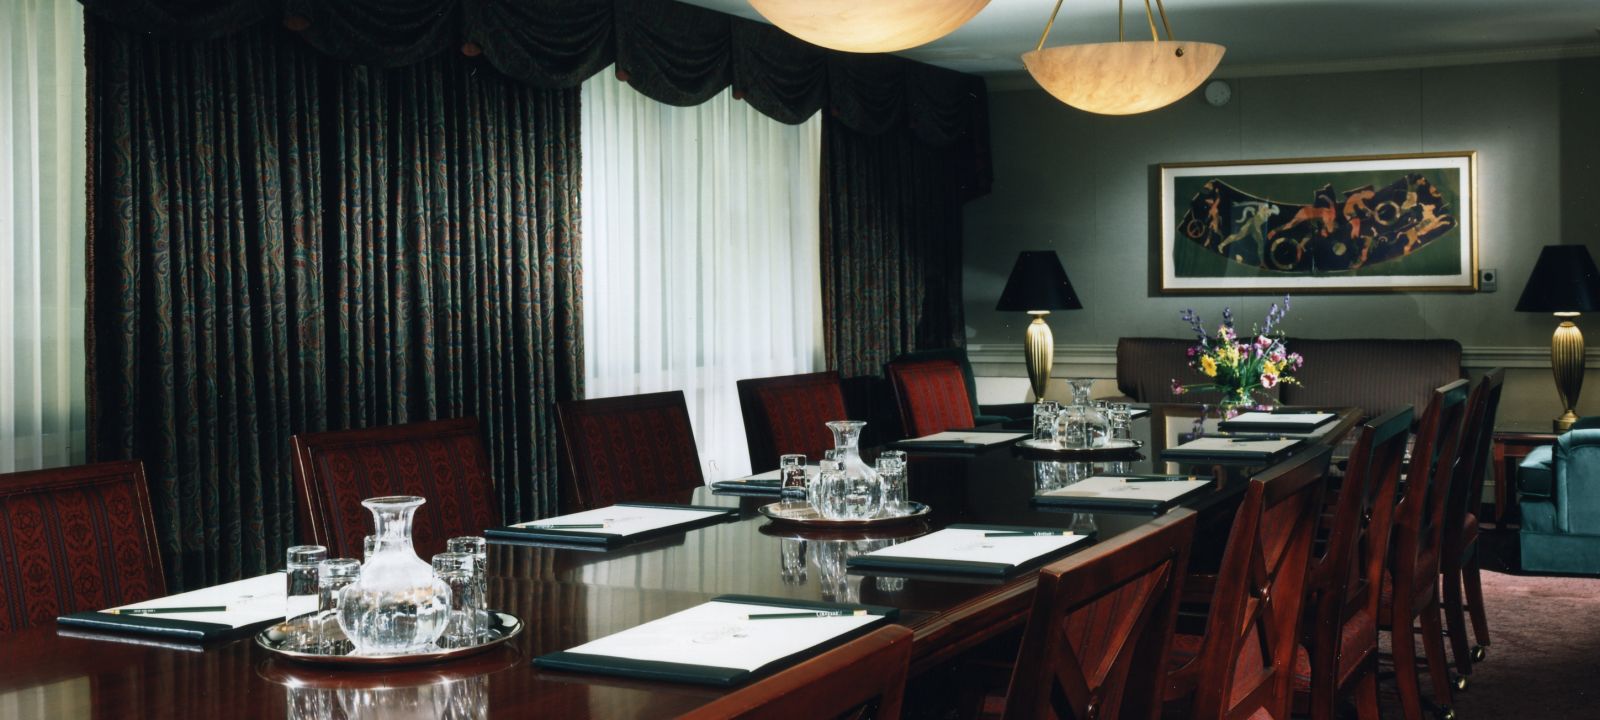 The Colonnade Hotel Boardroom Meeting Space